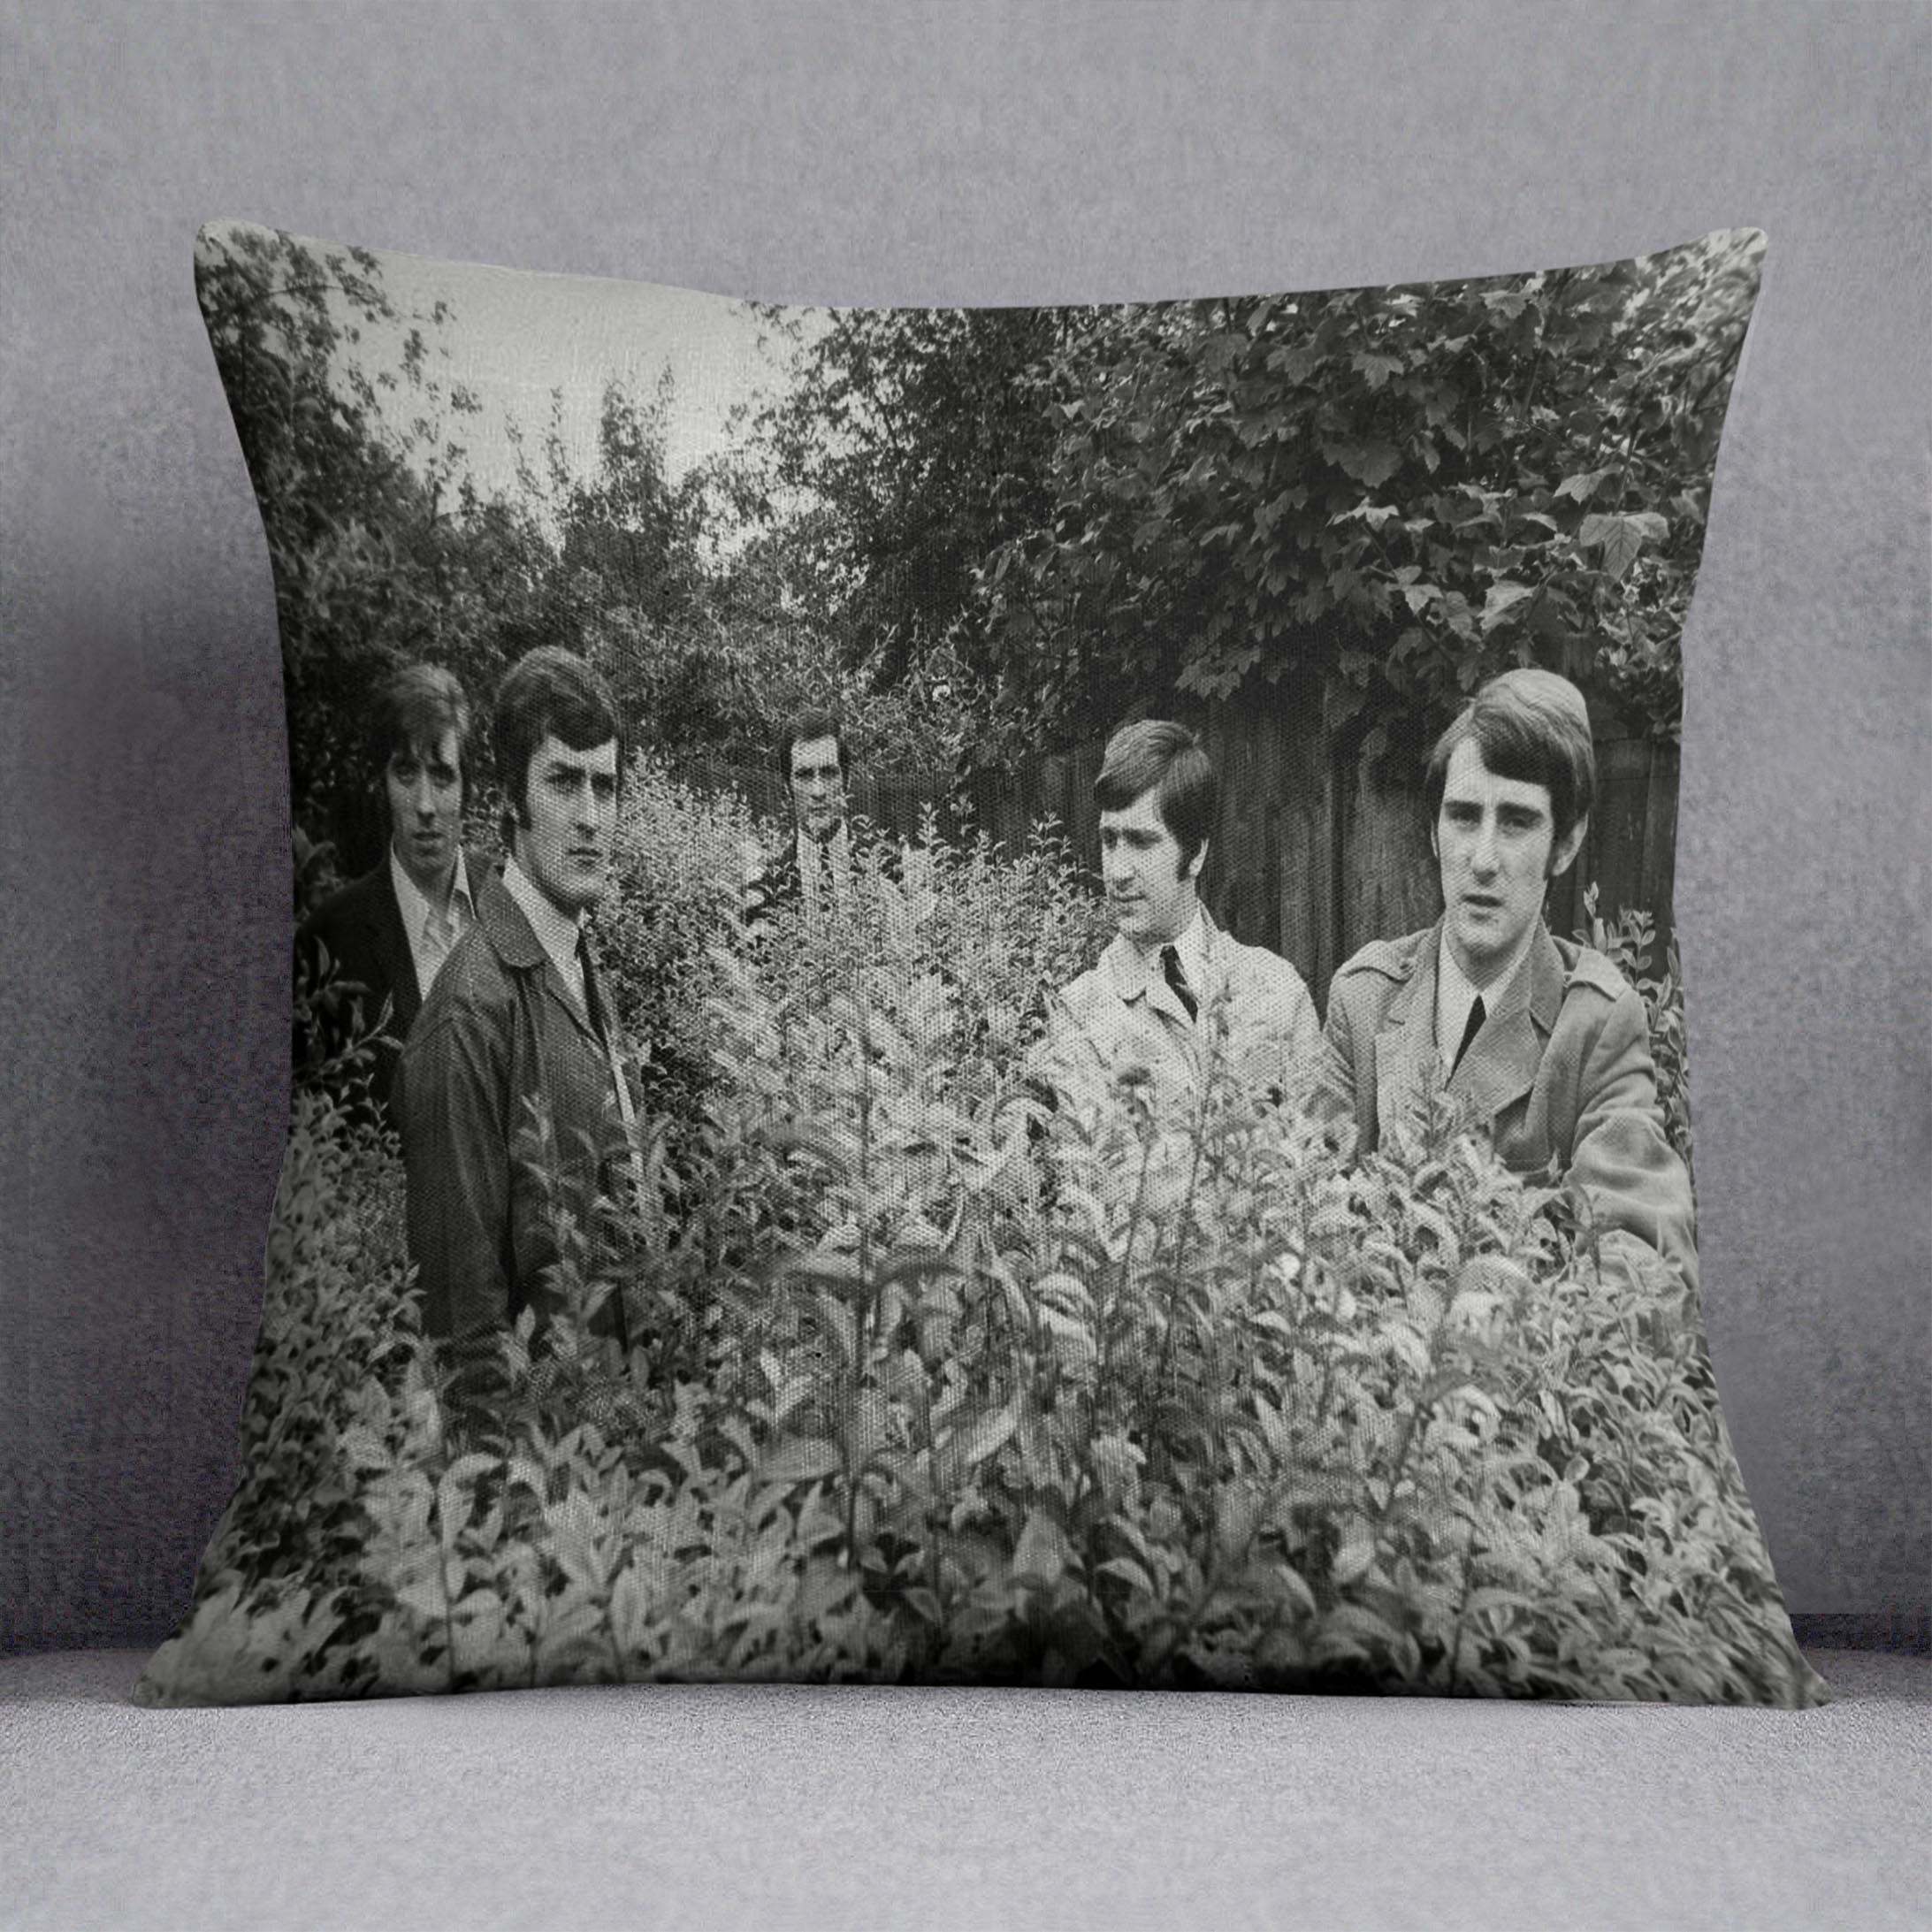 The Moody Blues in a field Cushion